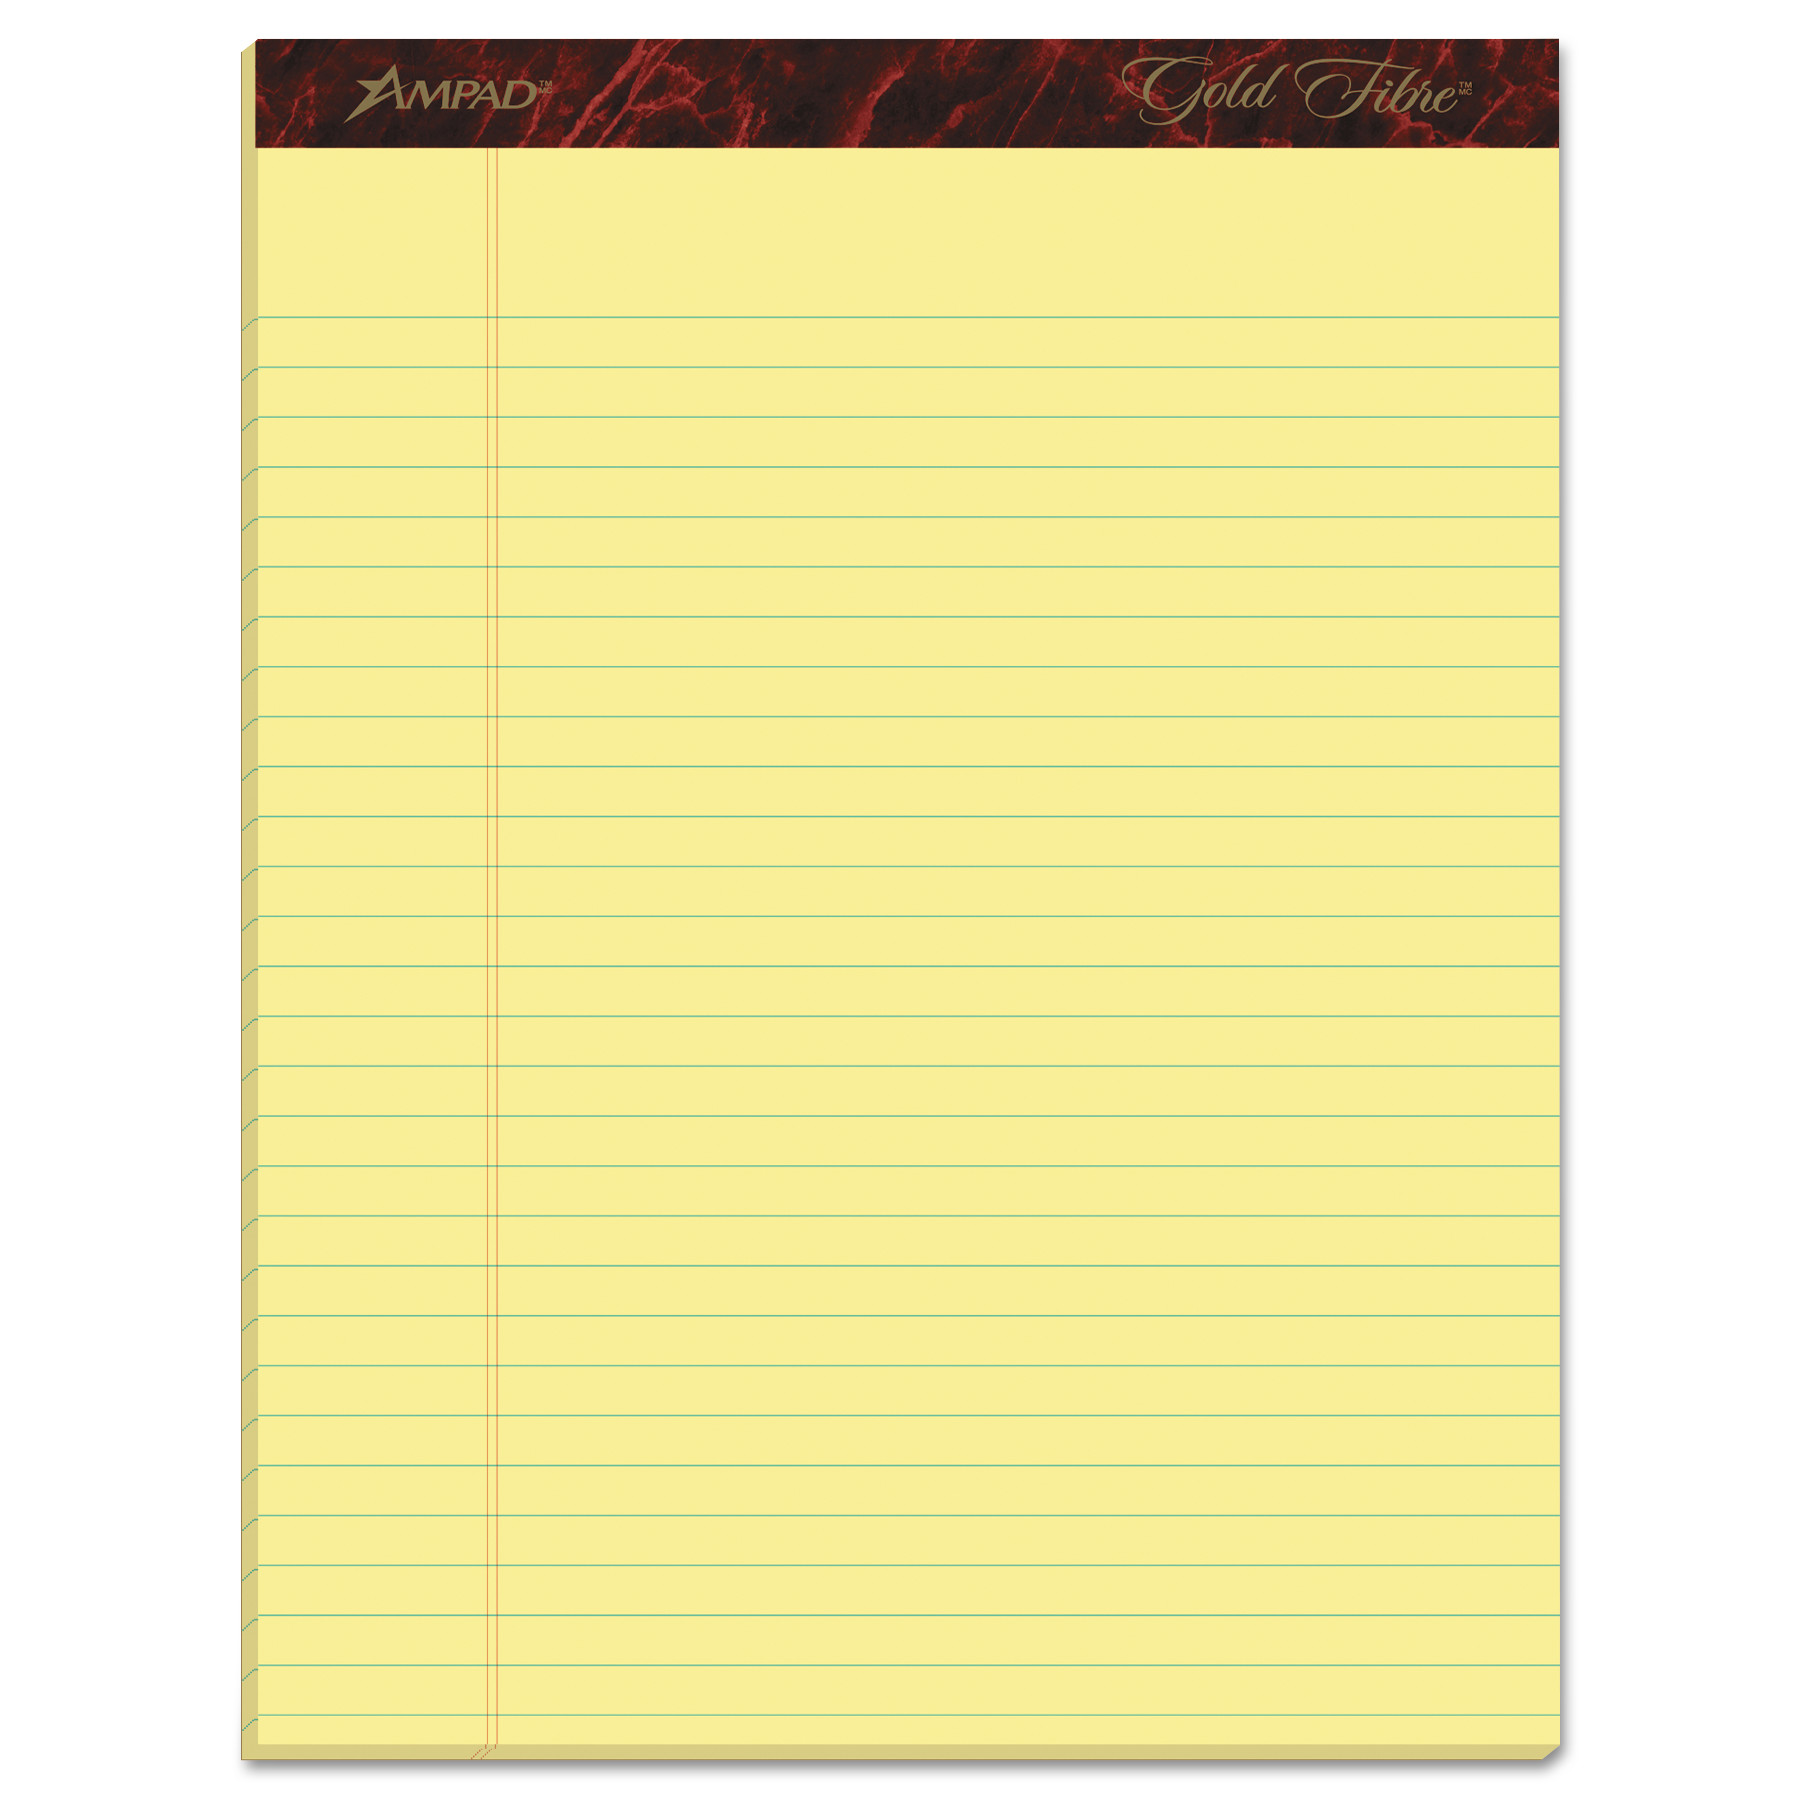  Ampad 20-020R Gold Fibre Writing Pads, Wide/Legal Rule, 8.5 x 11.75, Canary, 50 Sheets, Dozen (TOP20020) 